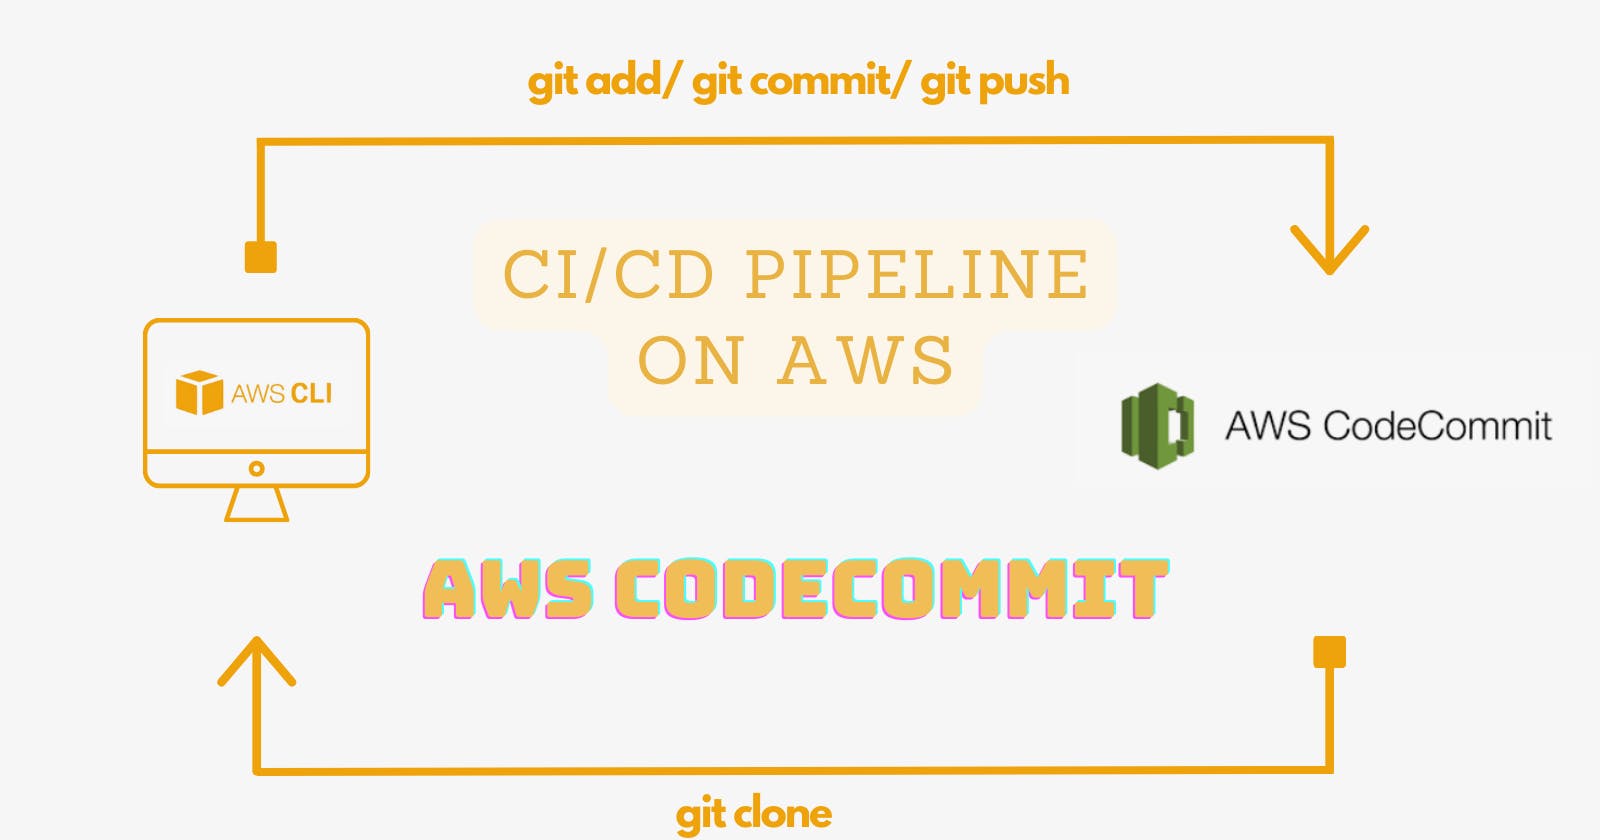 Your CI/CD pipeline on AWS - Part-1